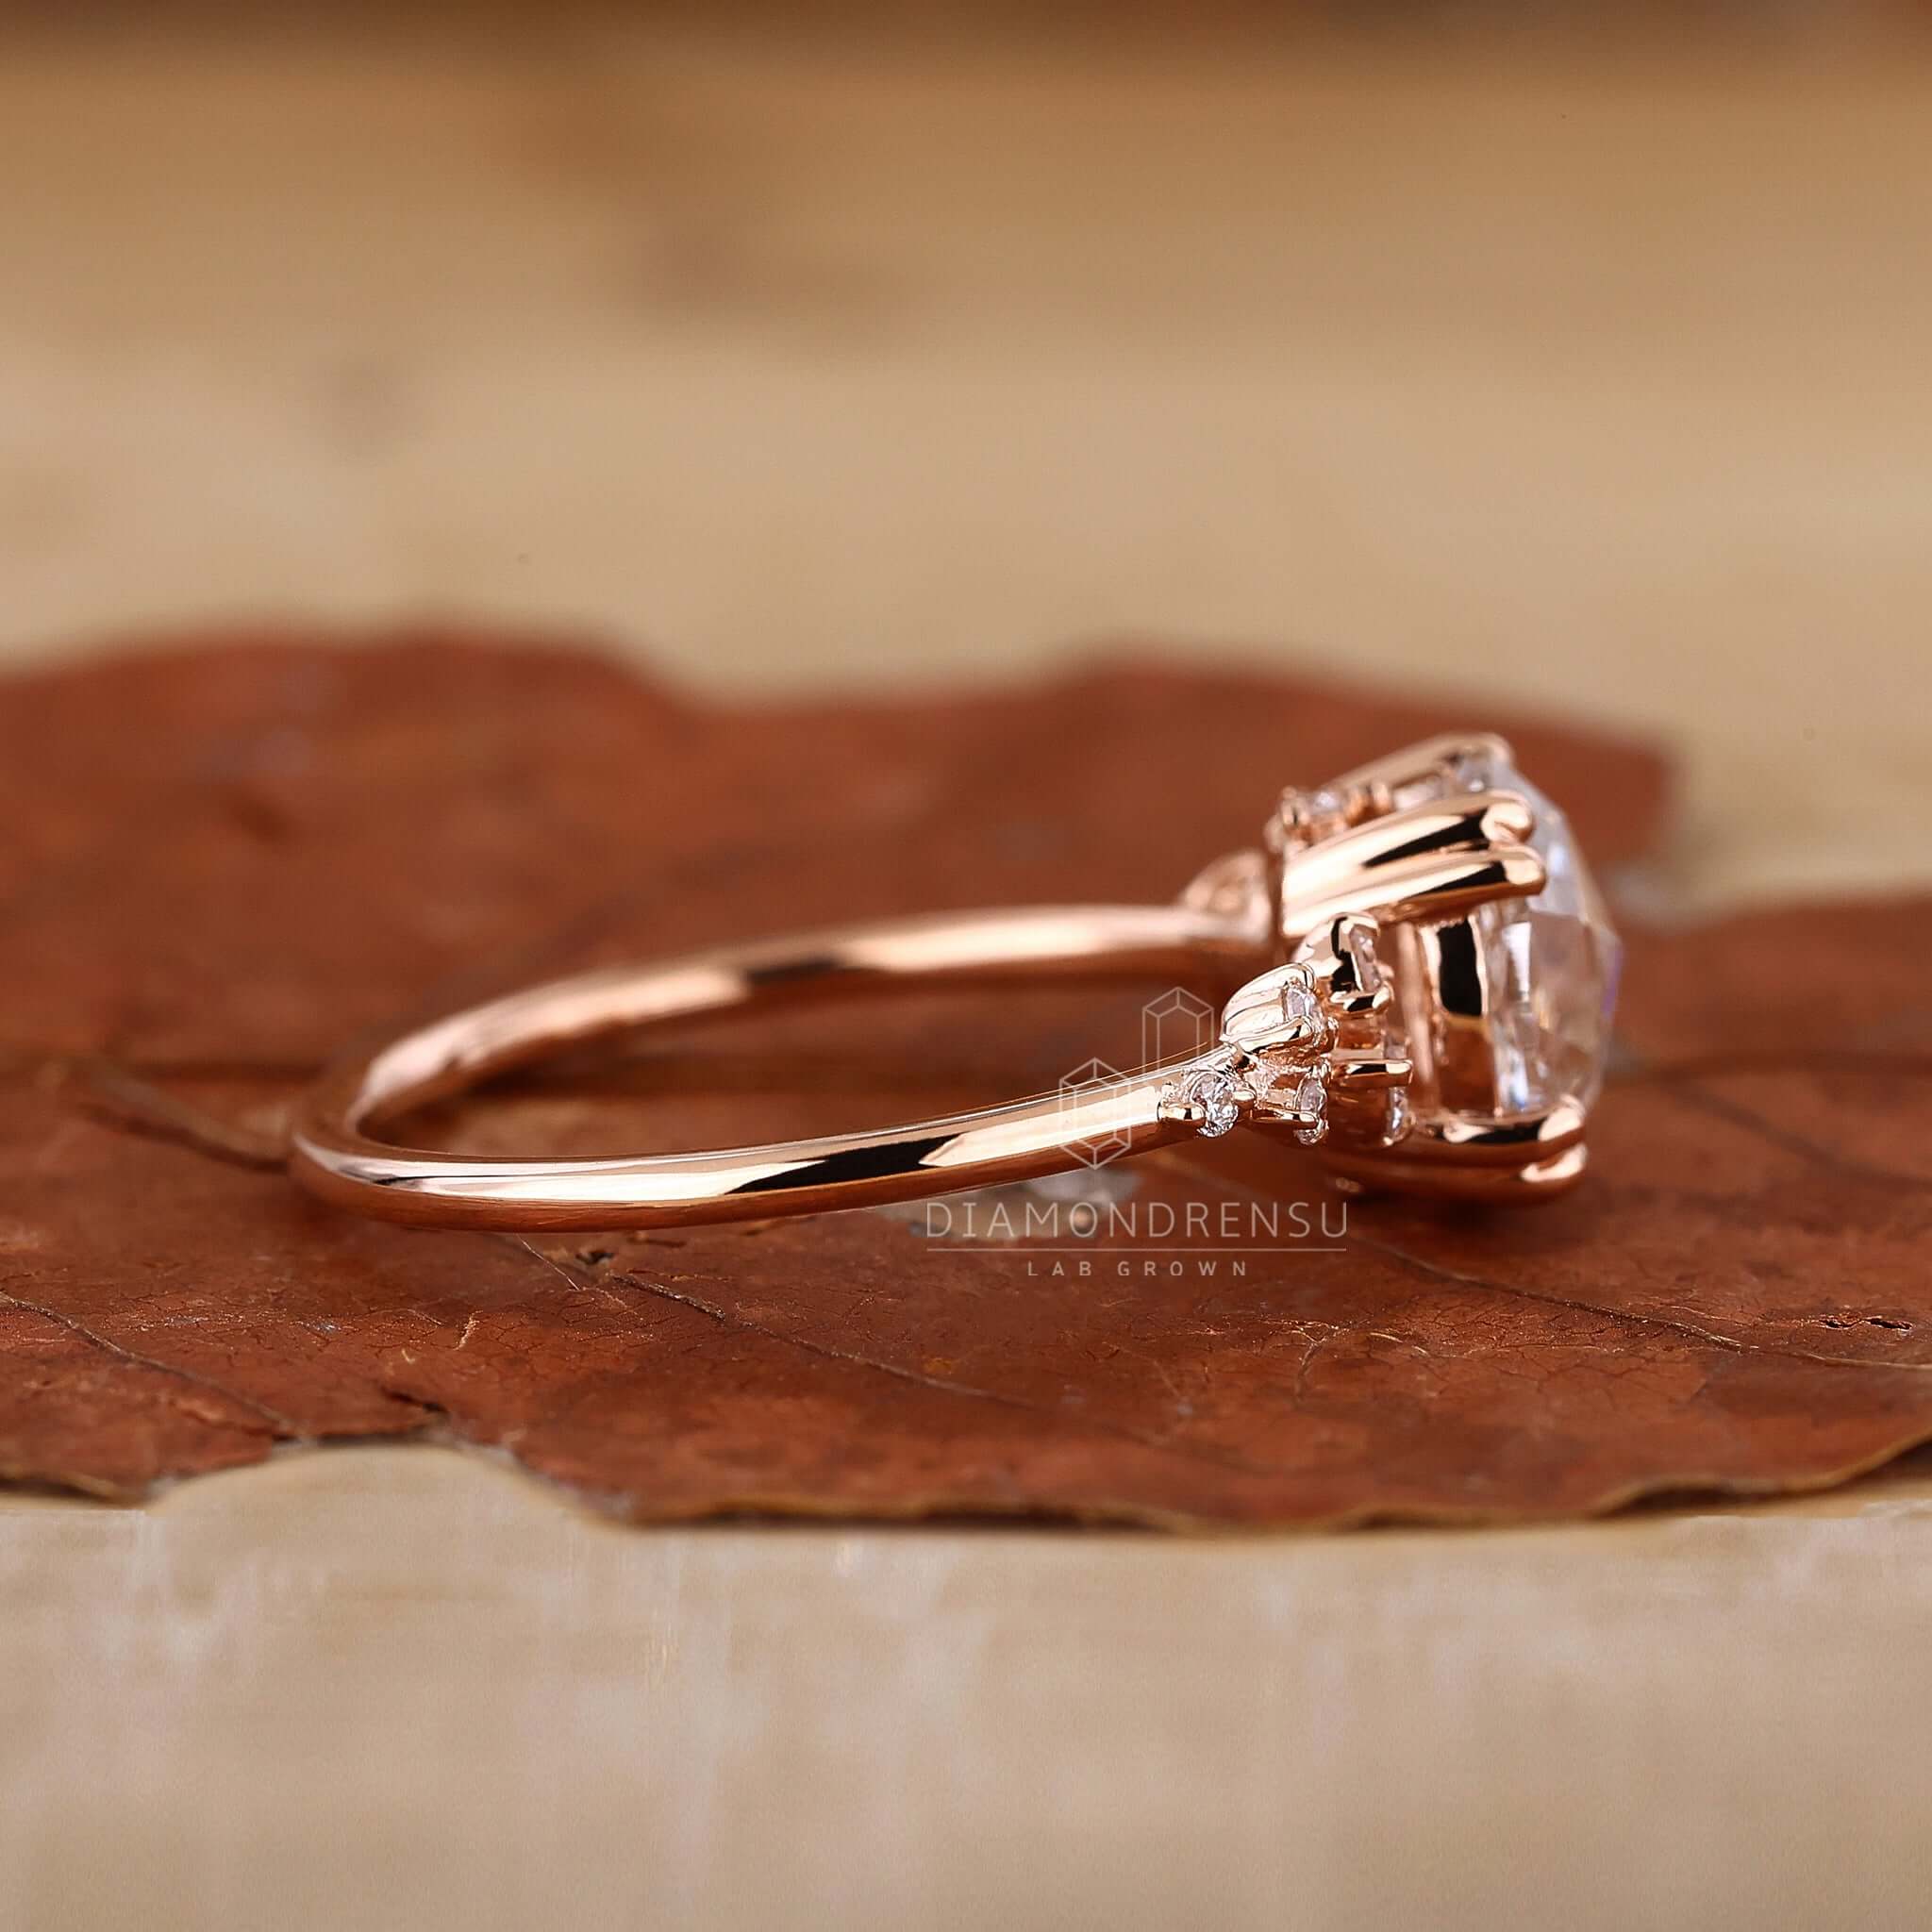 Close-up of an antique rose cut diamond ring, displaying its intricate craftsmanship and historical charm.